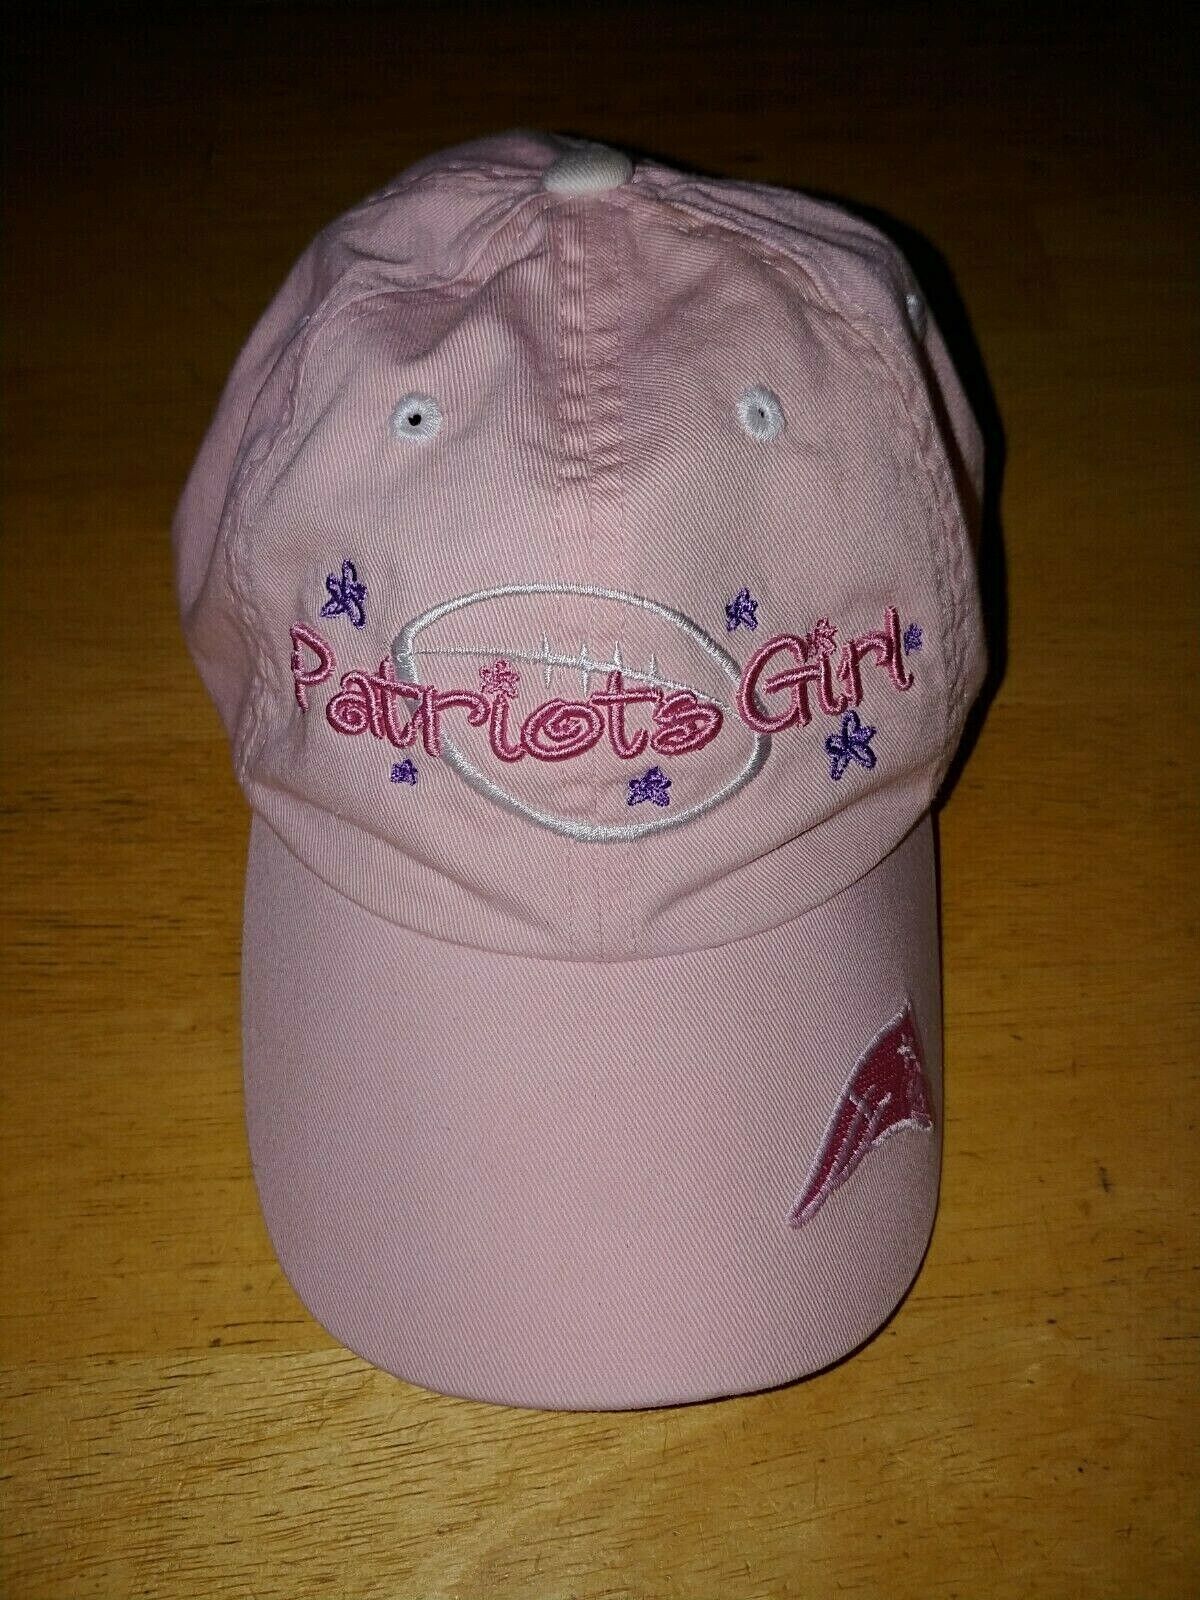 Primary image for PATRIOTS NFL GIRL PINK ADJUSTABLE COTTON VISOR CAP-YOUTH-BARELY WORN-CUTE